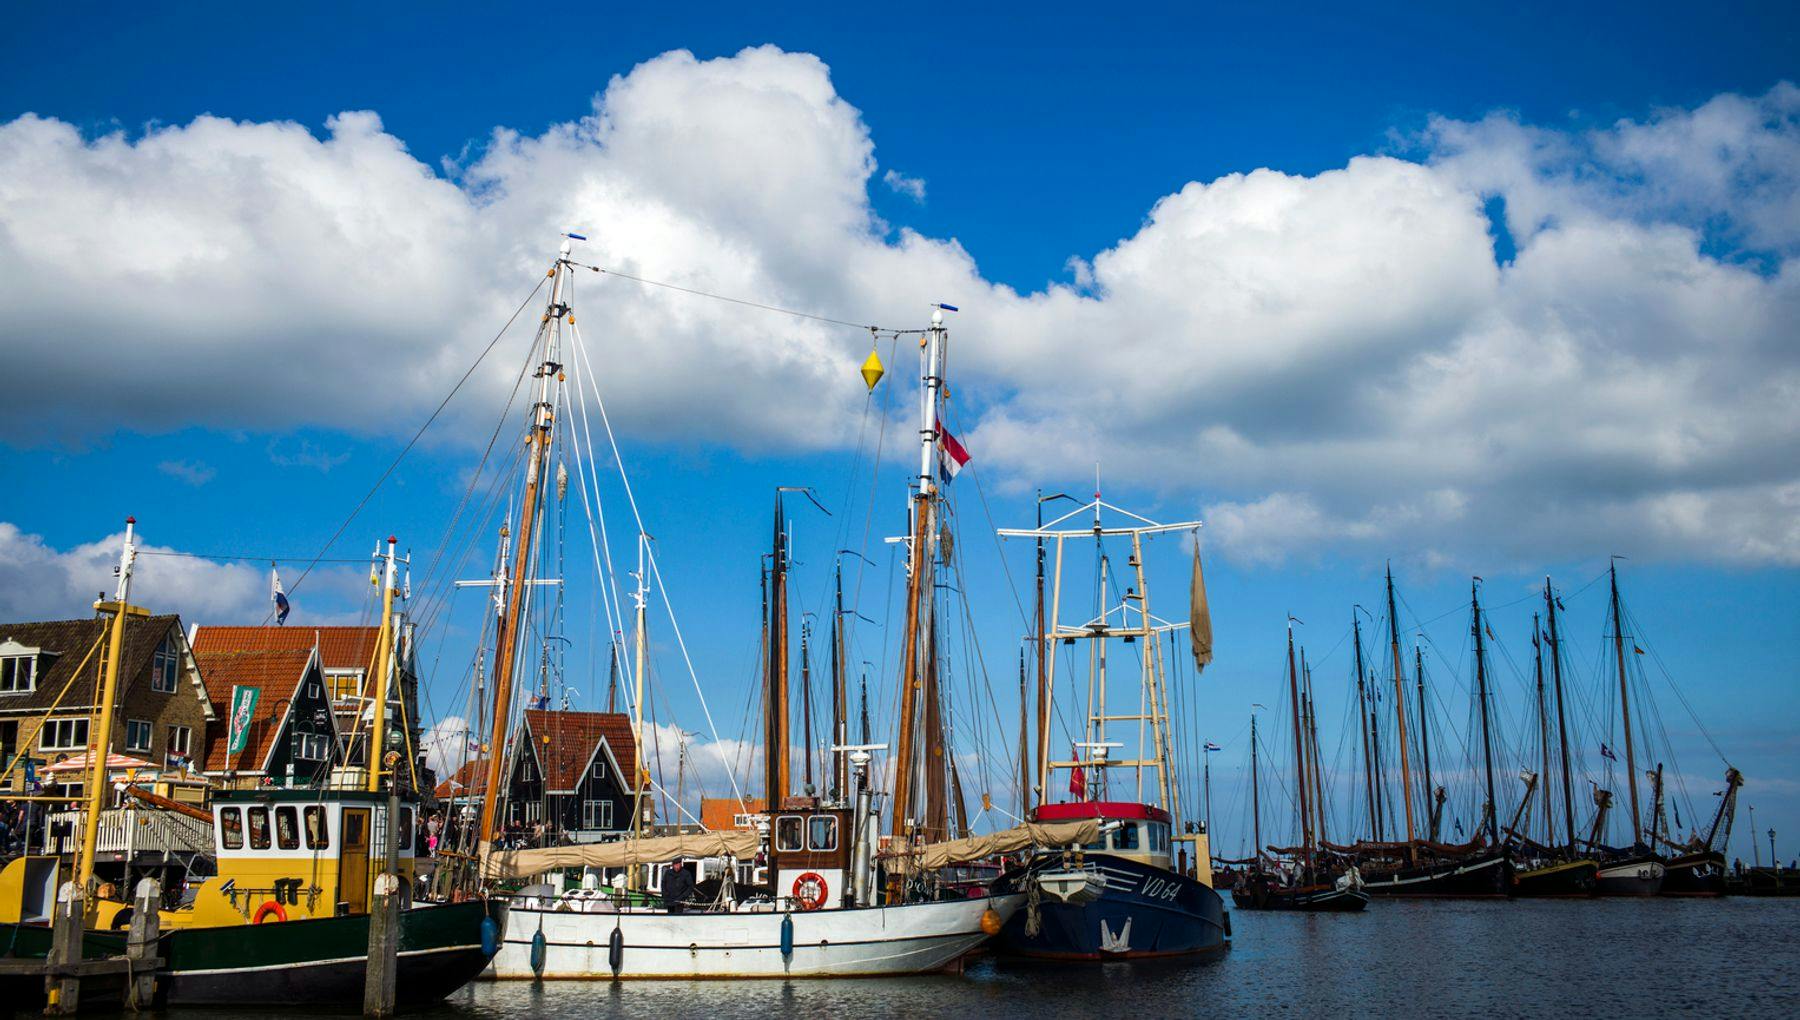 The port of Volendam during the traditional Pieperrace, a sailing competition for traditional flatbottomed boats on the southern IJsselmeer.